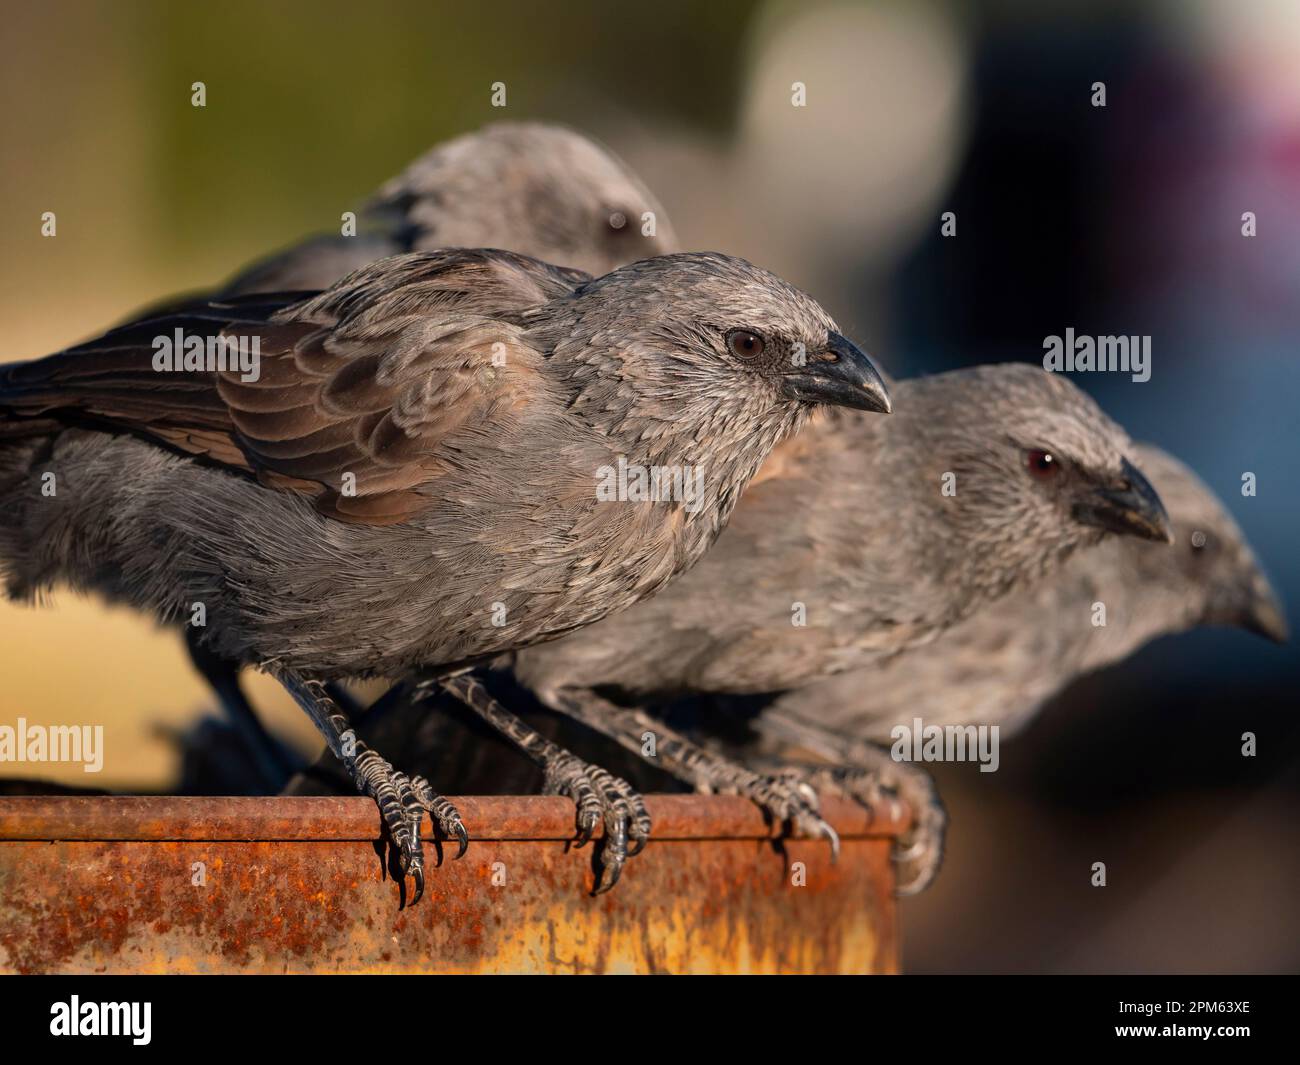 Apostlebird, Struthidea cinerea, several birds perched on a rusty drum searching for food in outback Australia Stock Photo